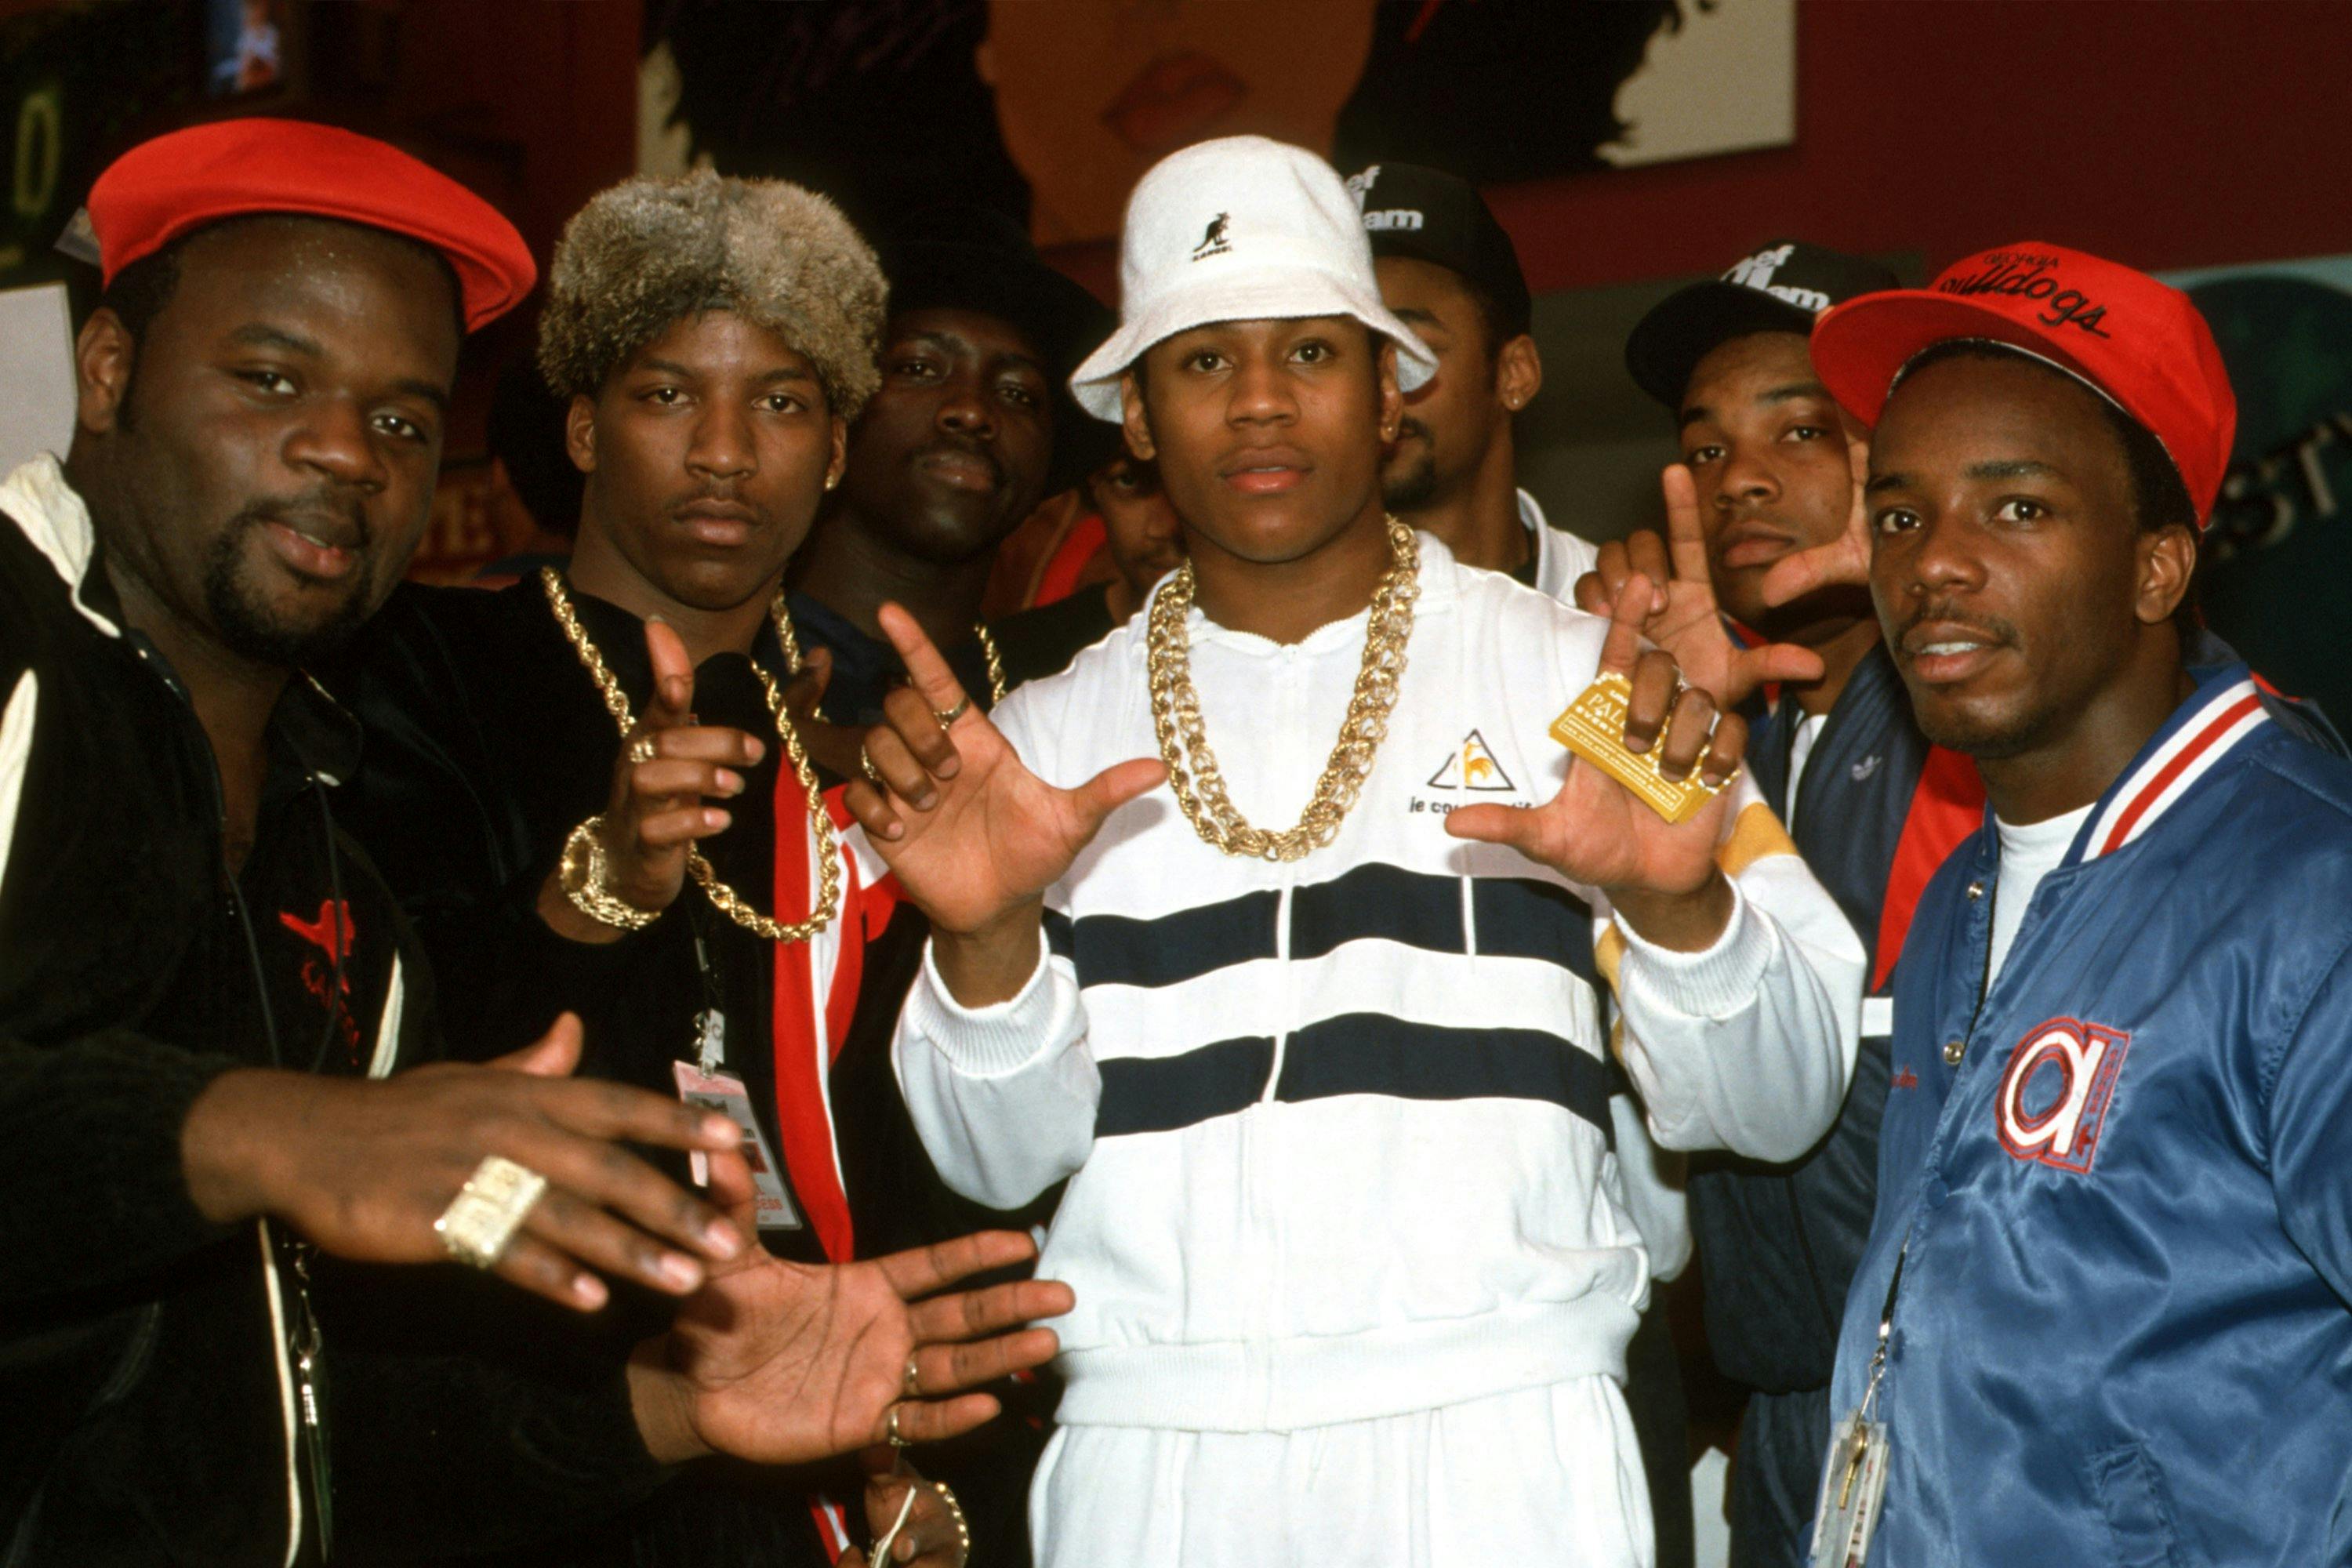 LL Cool J and Crew